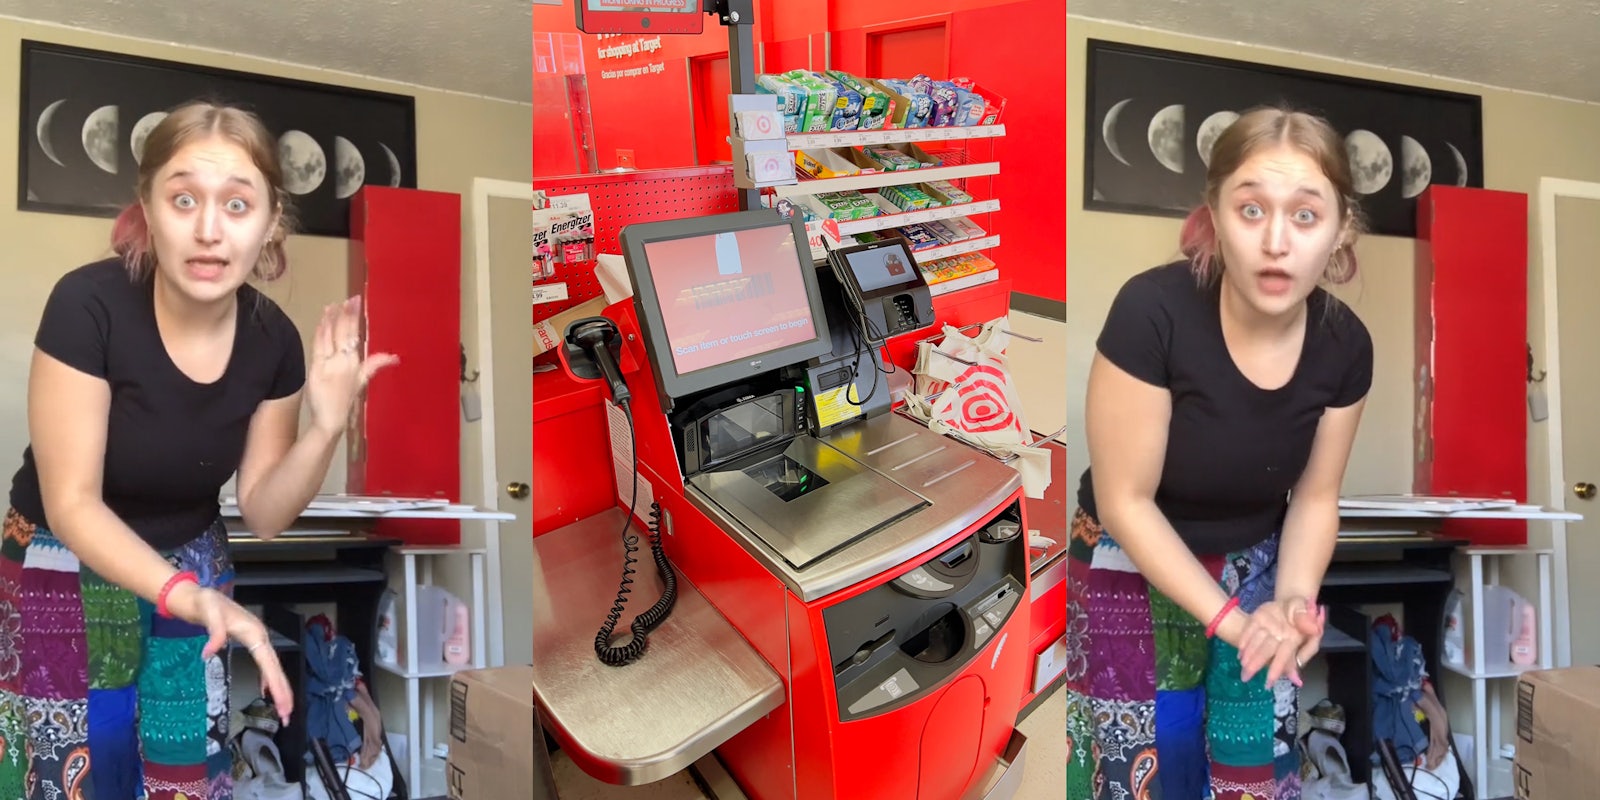 woman speaking in bedroom with hand about to slap the other (l) Target self checkout (c) woman speaking in bedroom with hand slapping the other (r)